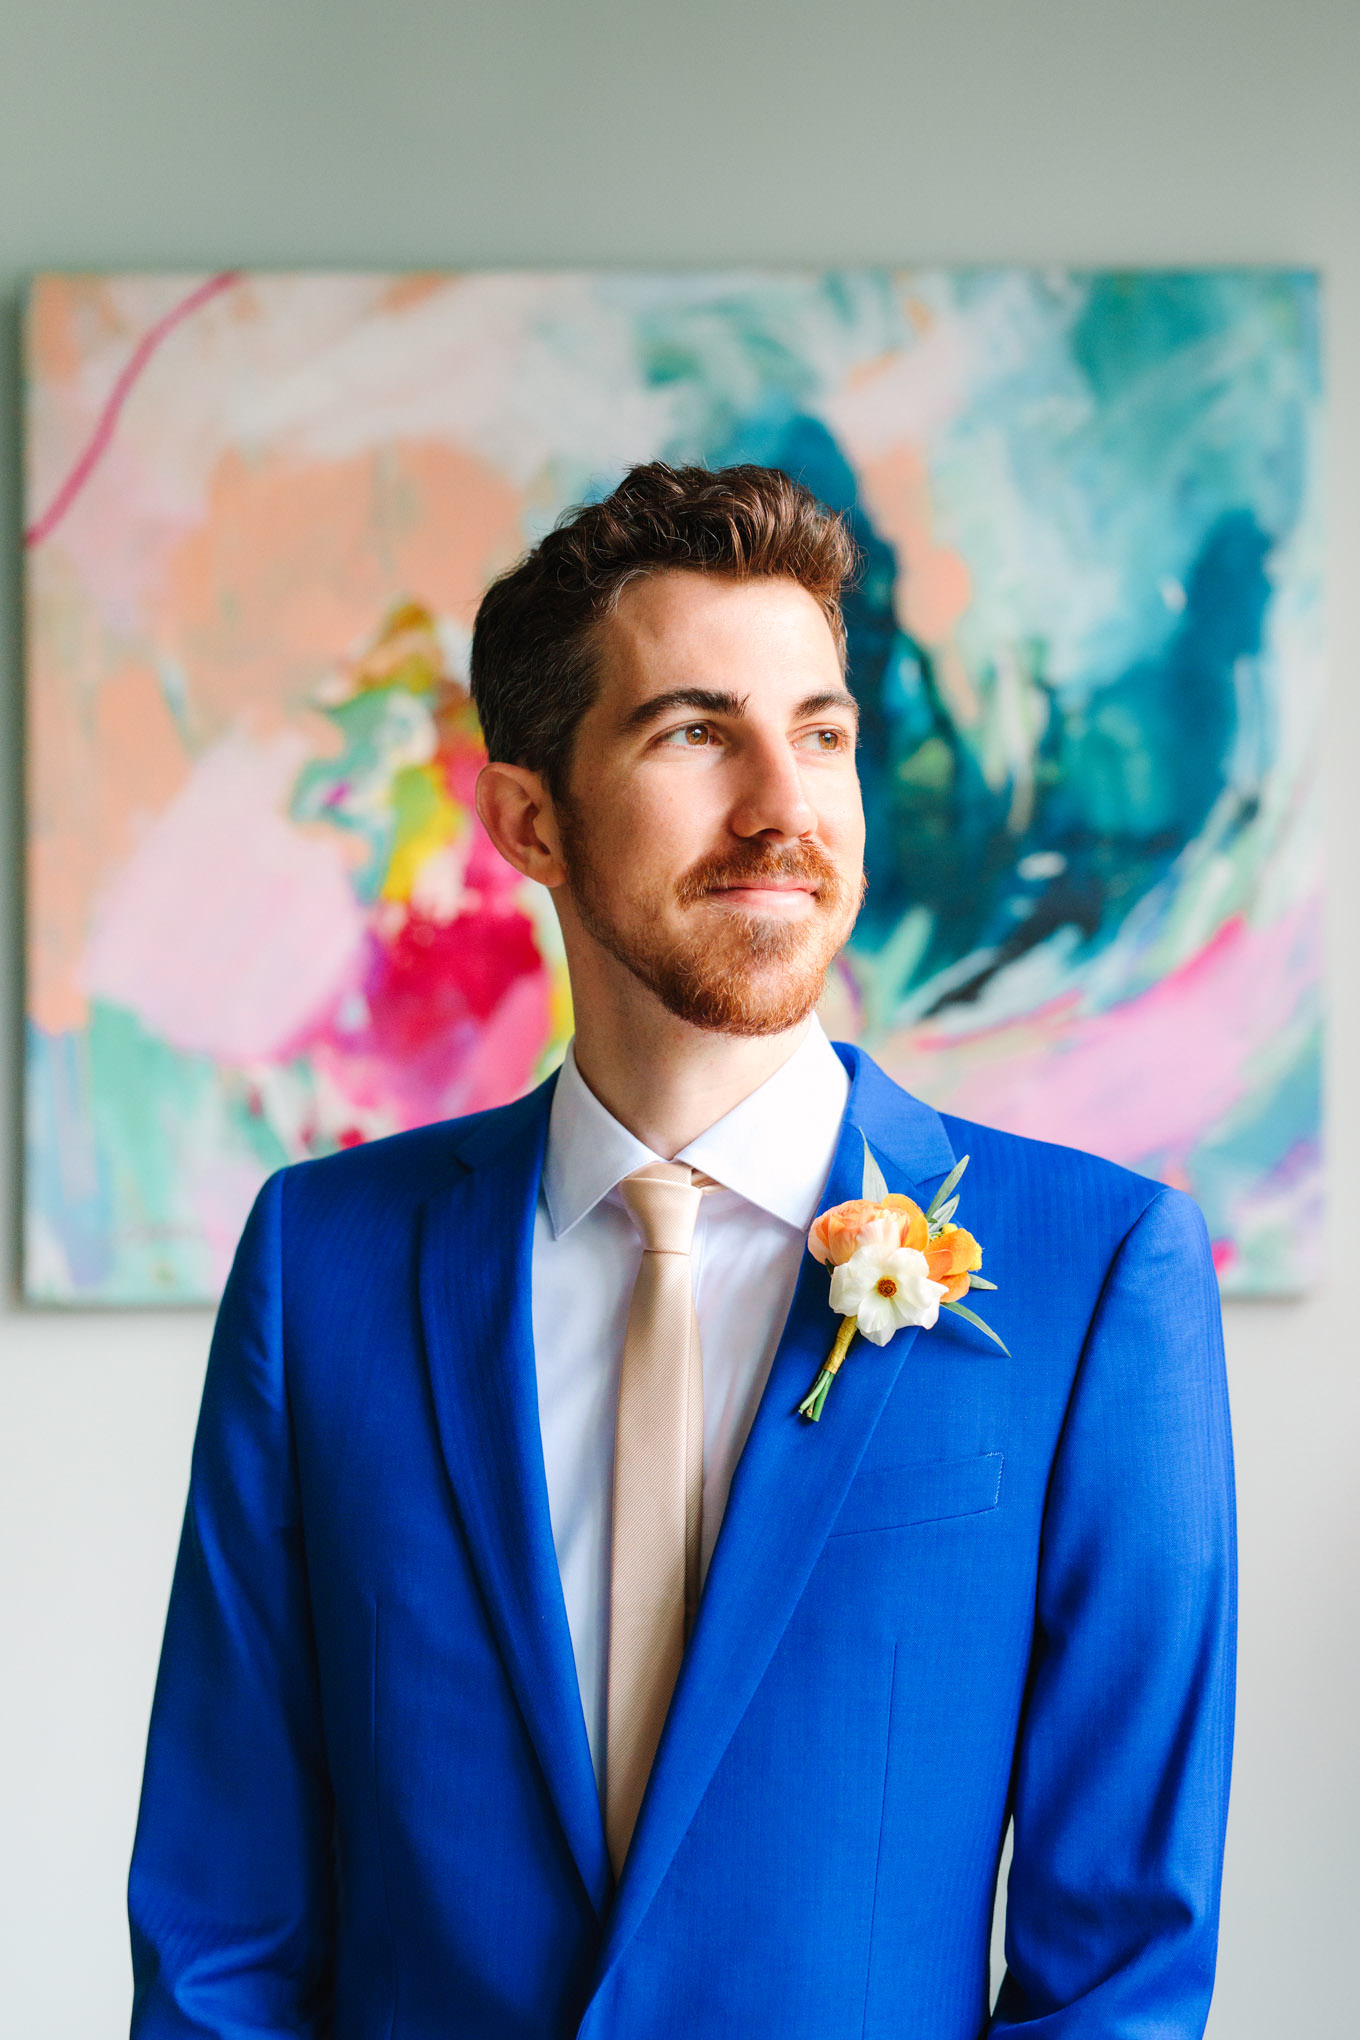 Groom in bright blue suit | TV inspired wedding at The Fig House Los Angeles | Published on The Knot | Fresh and colorful photography for fun-loving couples in Southern California | #losangeleswedding #TVwedding #colorfulwedding #theknot   Source: Mary Costa Photography | Los Angeles wedding photographer